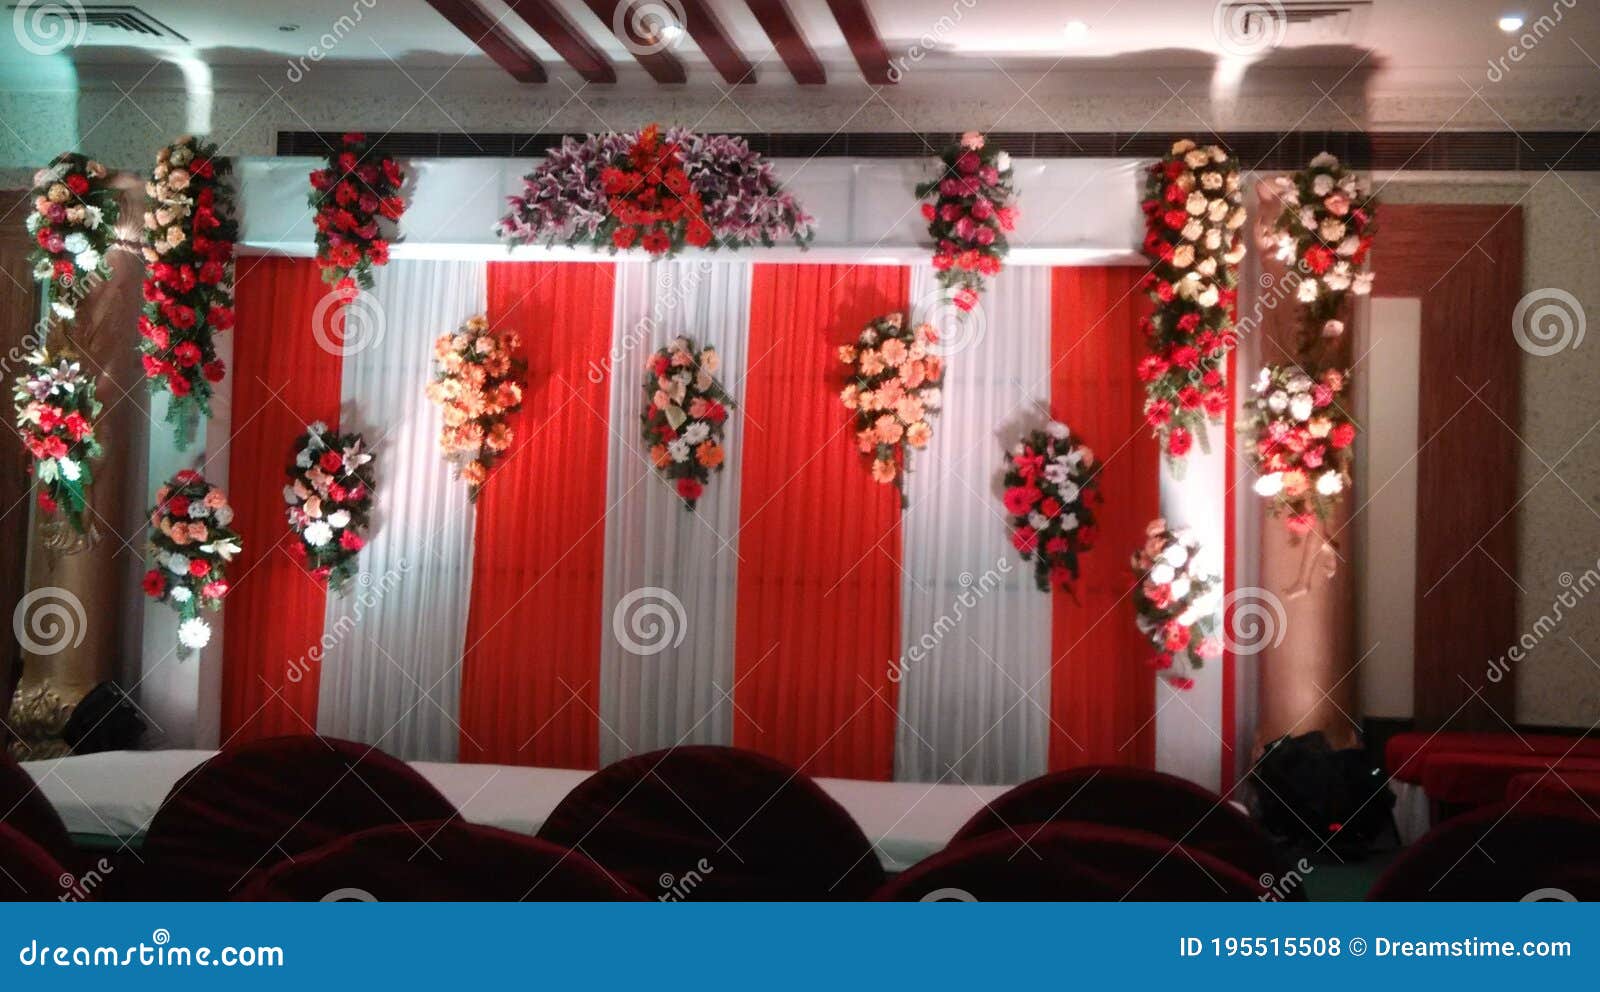 Decoration Ideas for Indian Engagement Ceremony Stock Photo ...